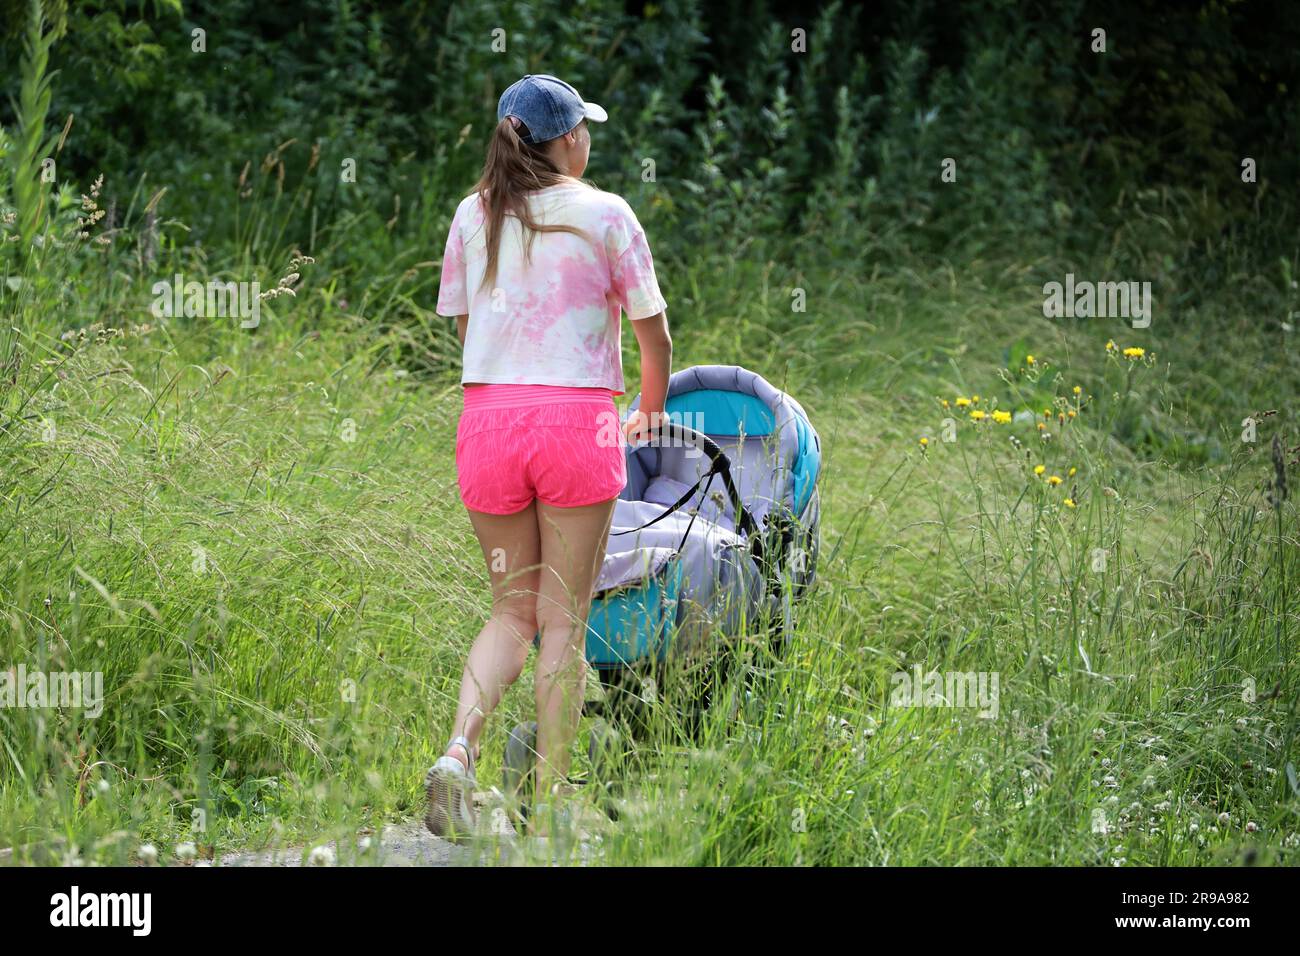 Girl in pink shorts walking with baby pram in a park. Young mother, leisure at summer nature Stock Photo